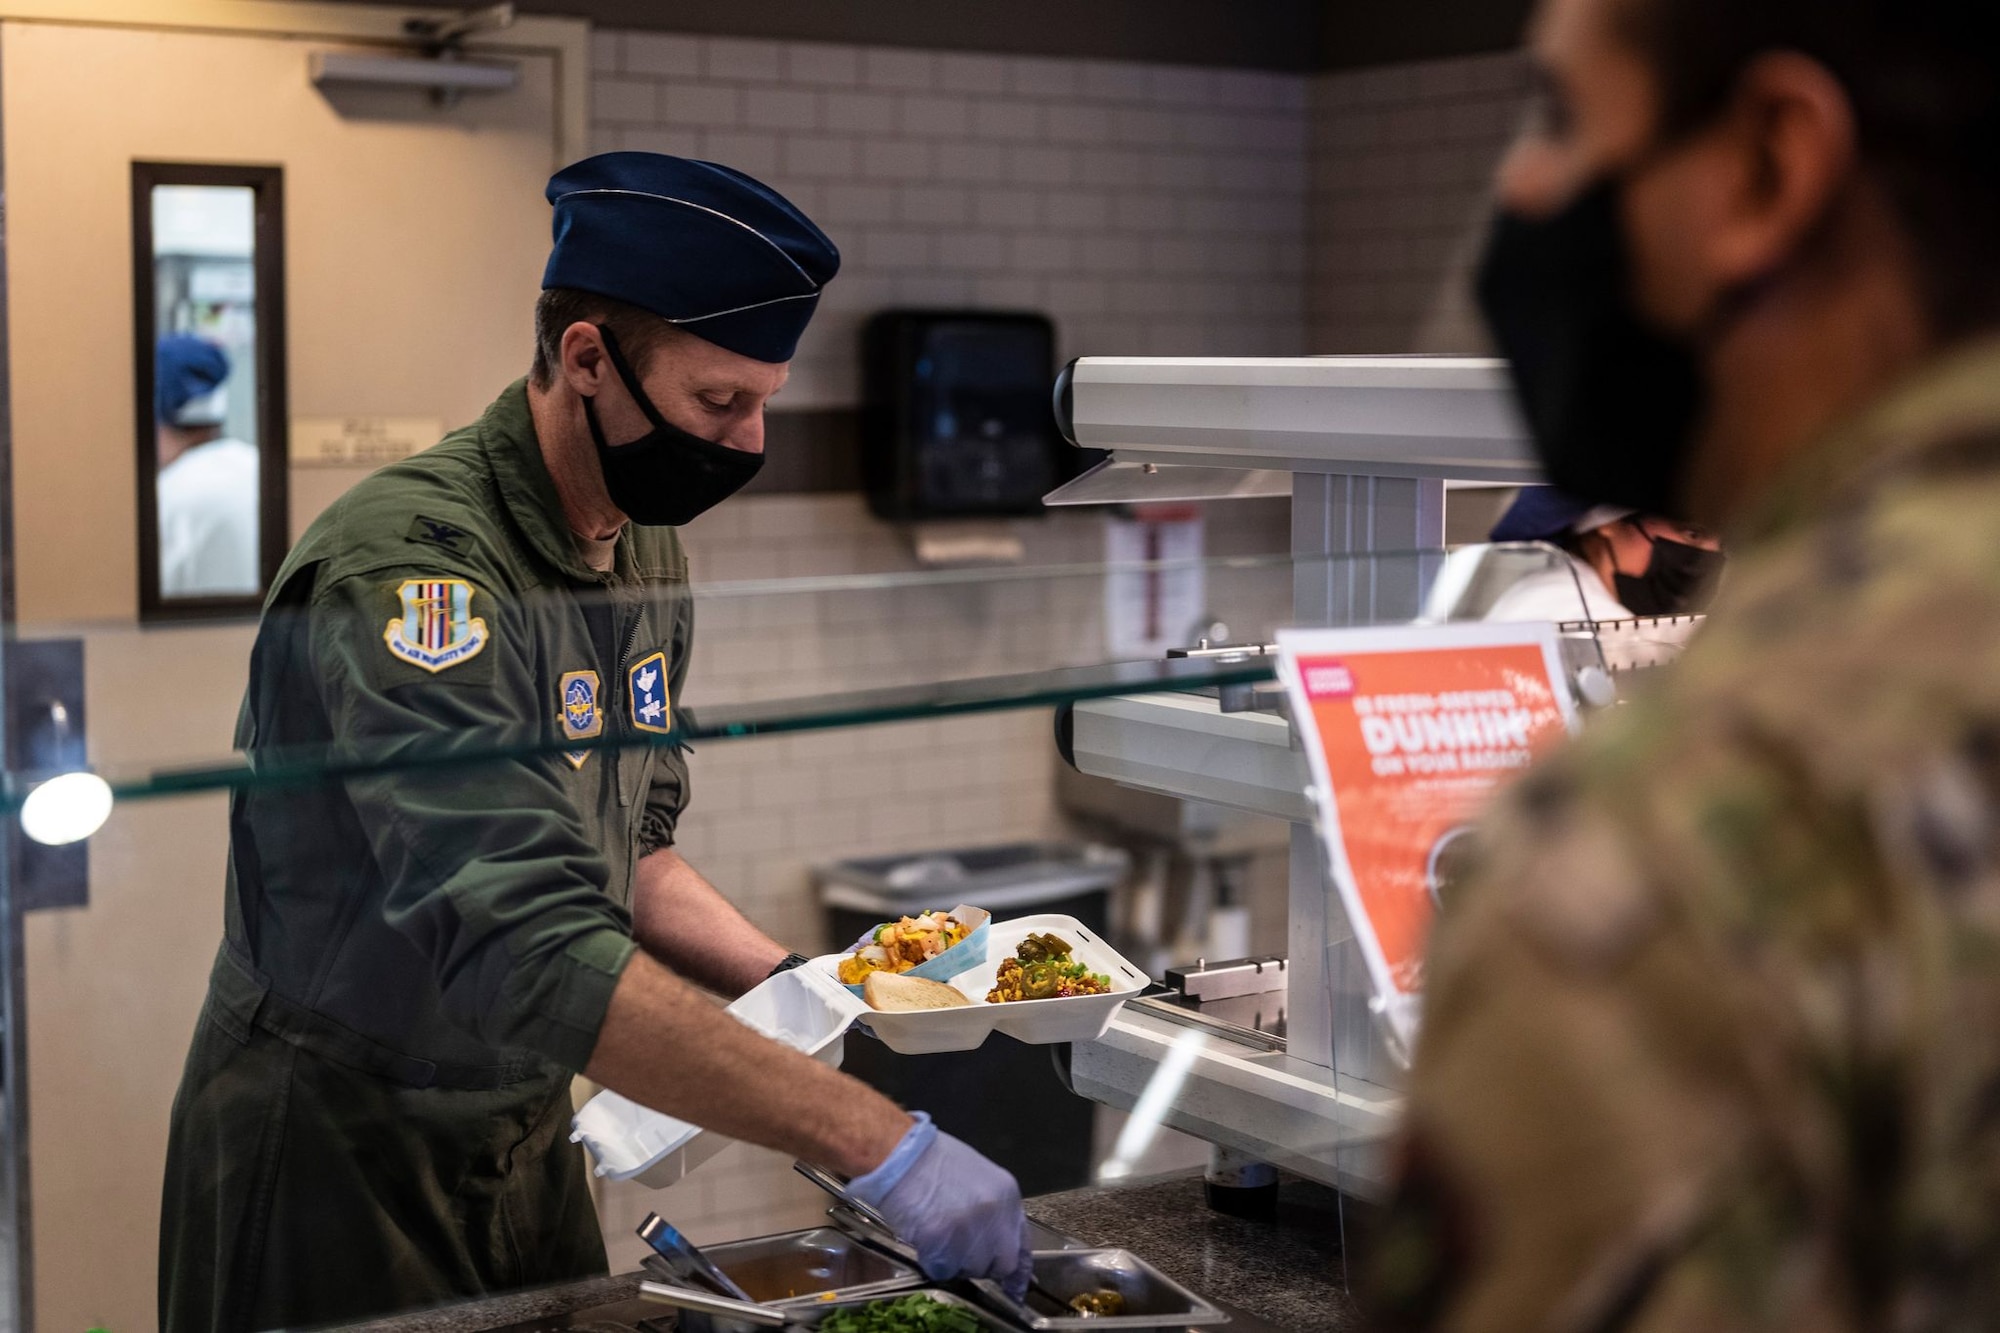 A man in a military uniform loads a to-go box with colorful food in a cafeteria-style line